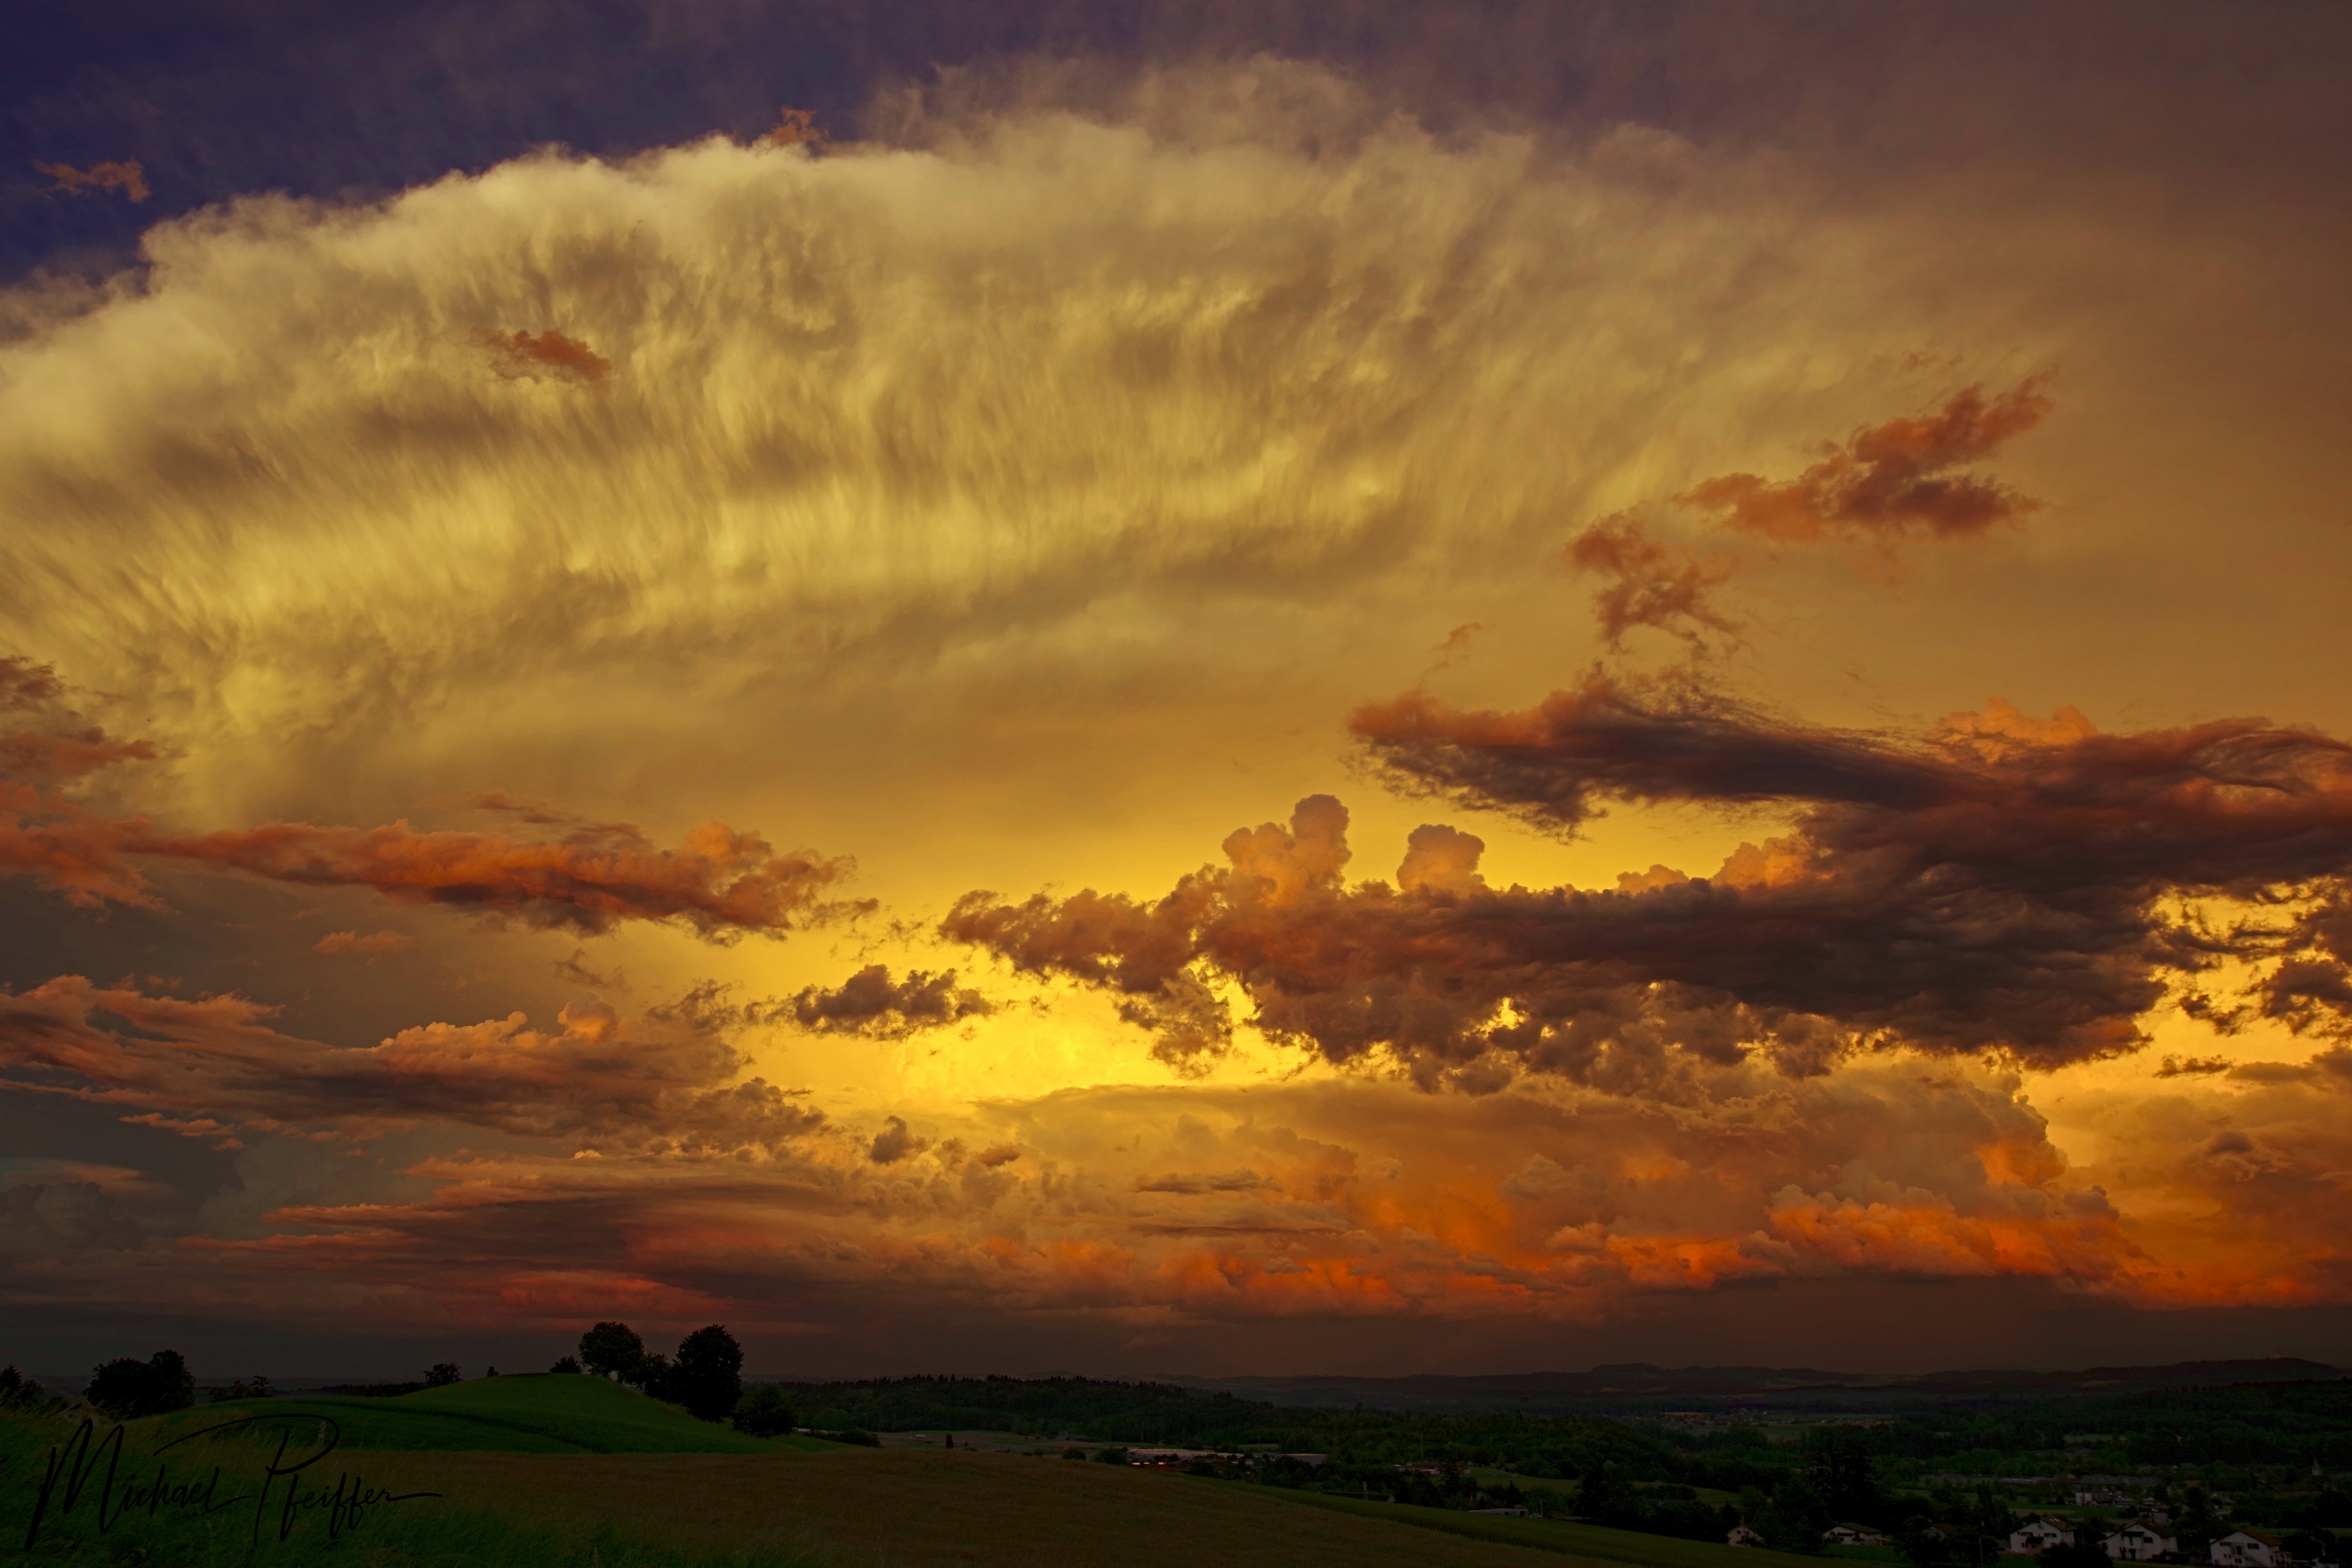 1st Place Stunning storm in the evening light in Switzerland by Wetter Ludwigsburg @lubuwetter